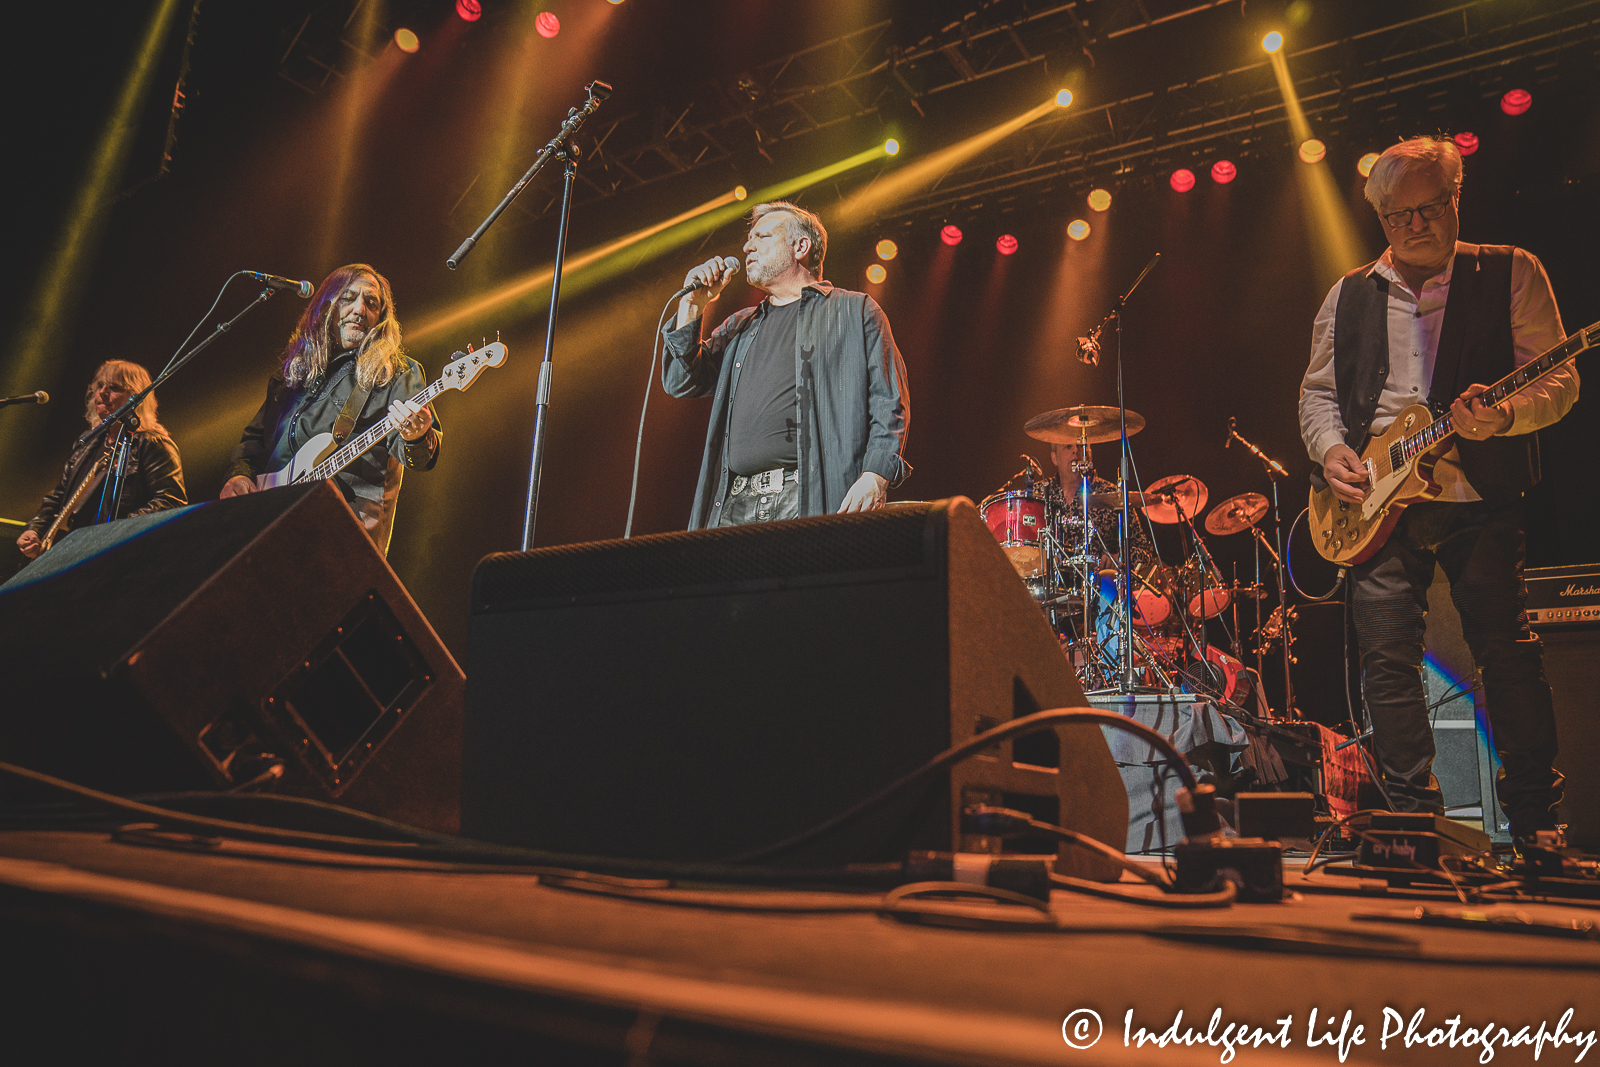 Missouri the band live in concert at Ameristar Casino's Star Pavilion in Kansas City, MO on April 9, 2022.